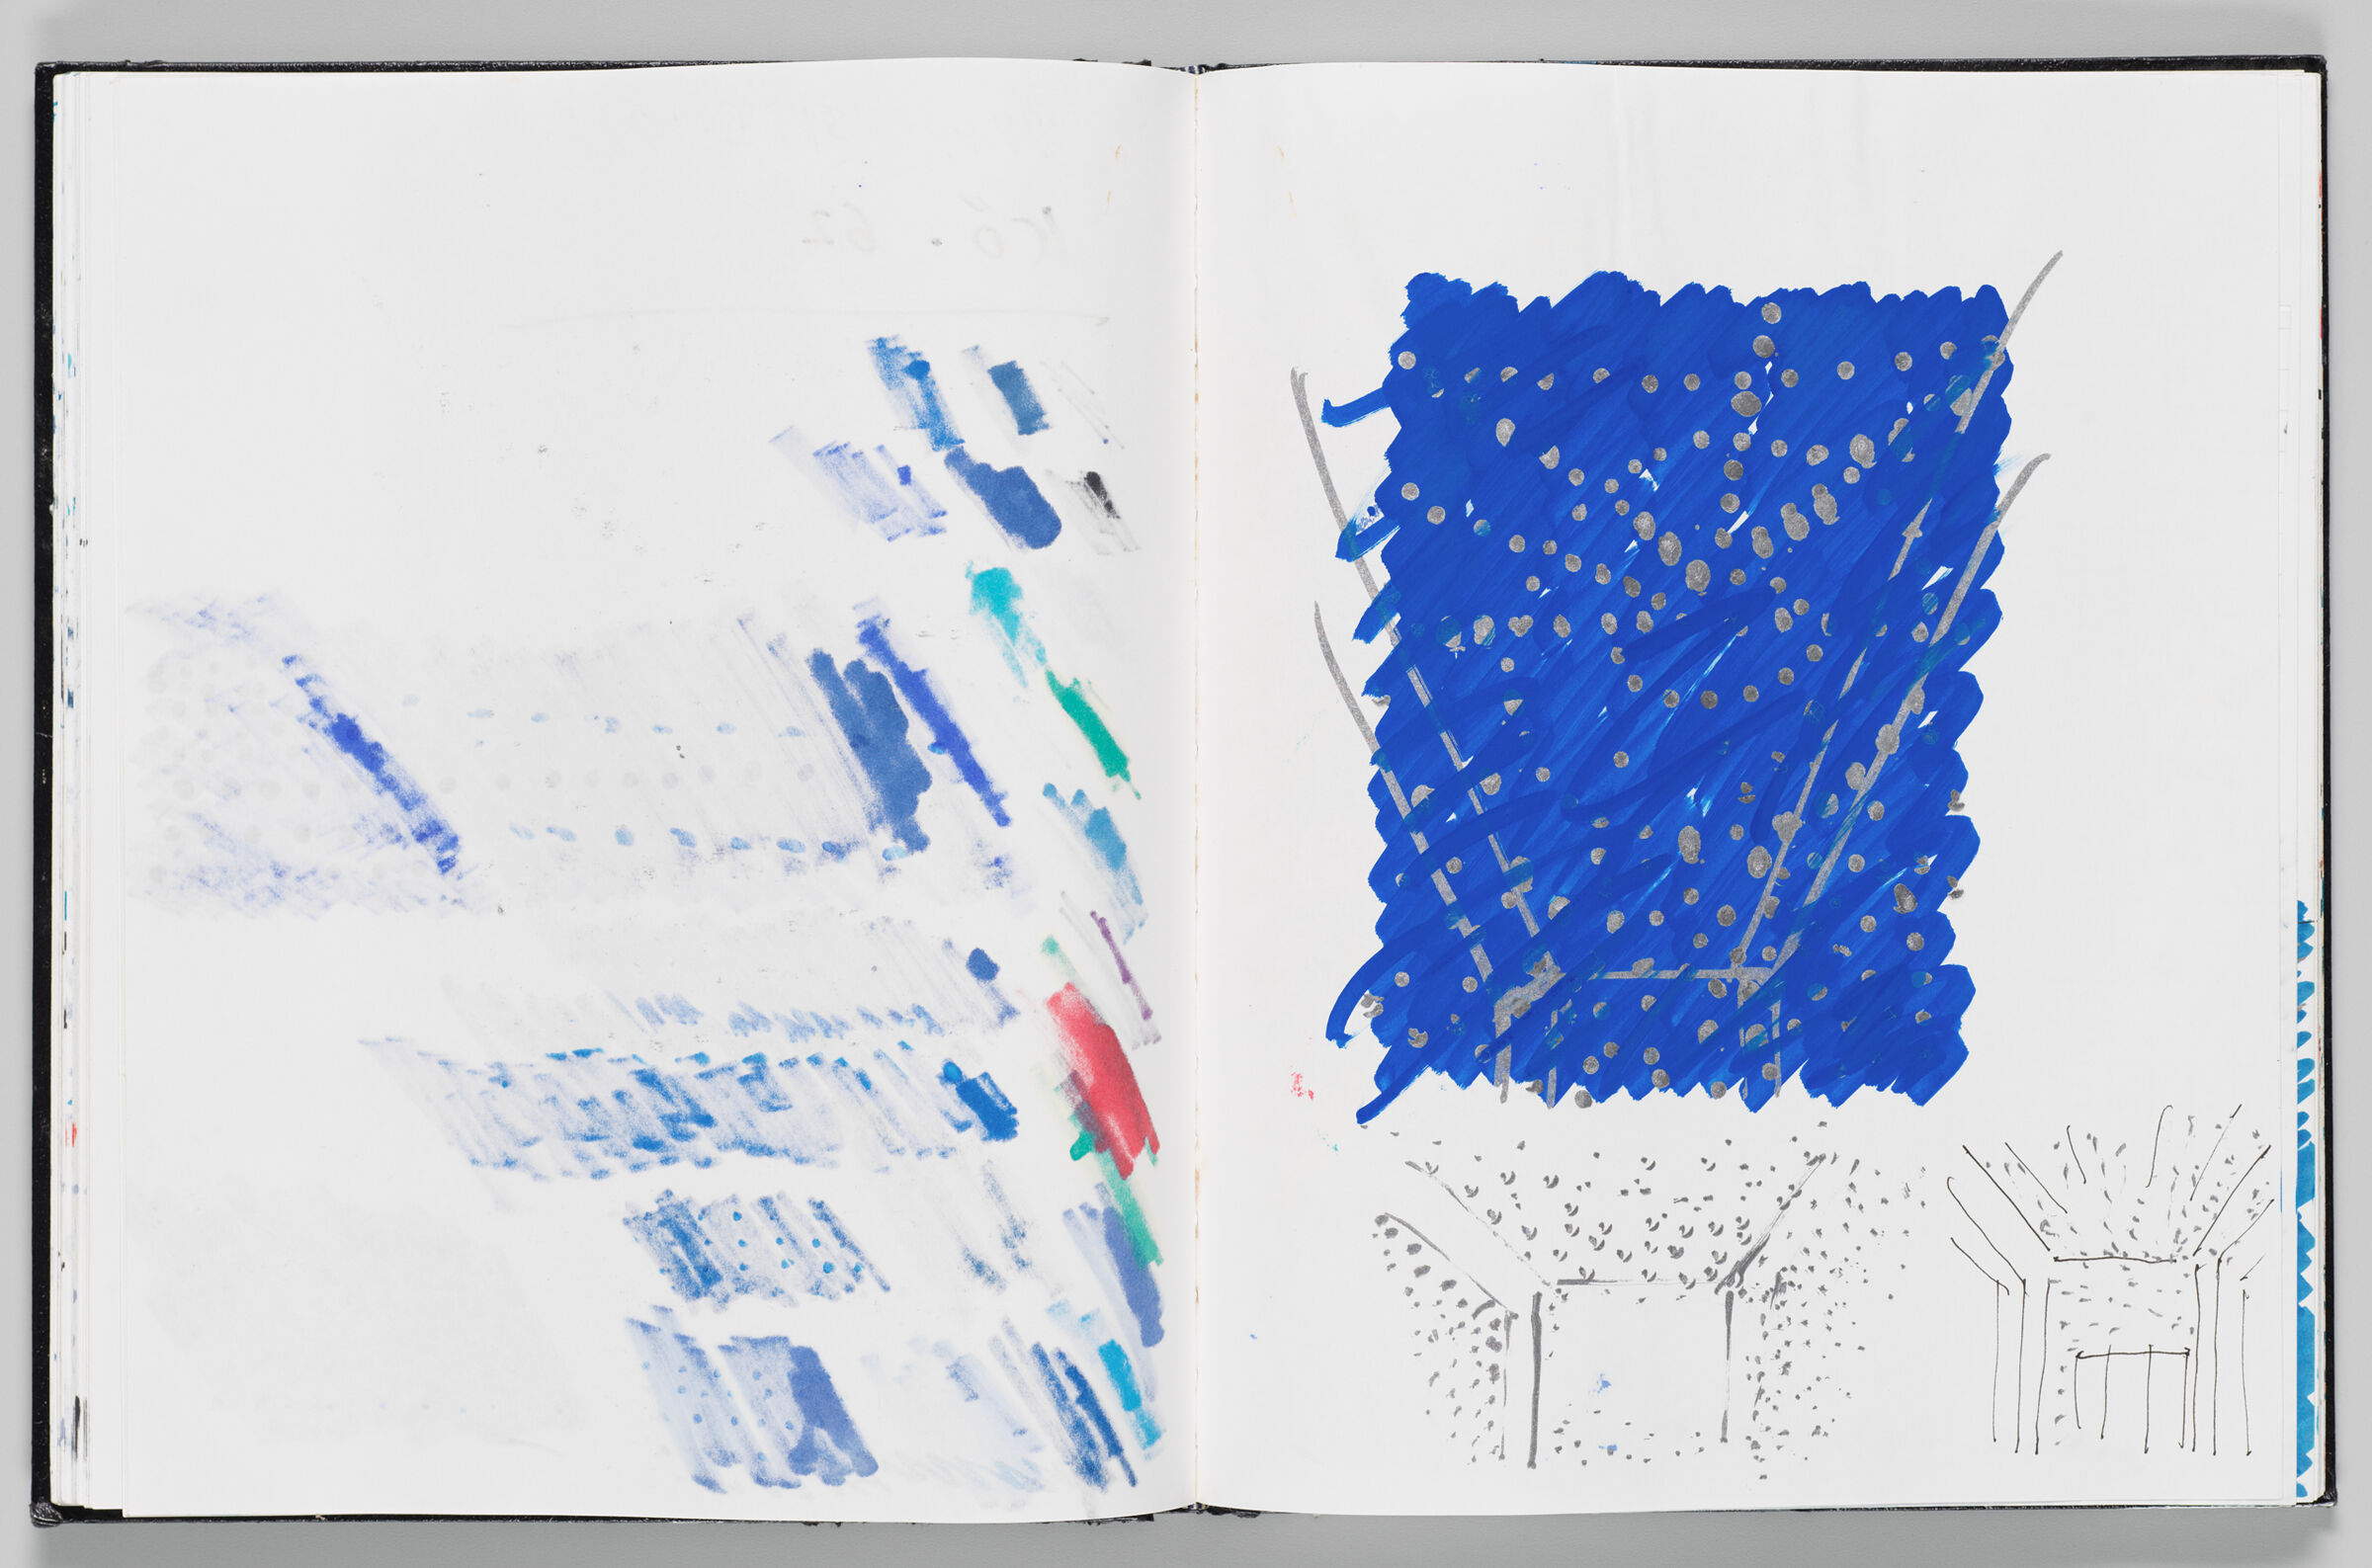 Untitled (Bleed-Through From Previous Page, Left Page); Untitled (Sketch Of Light Installation, Right Page)